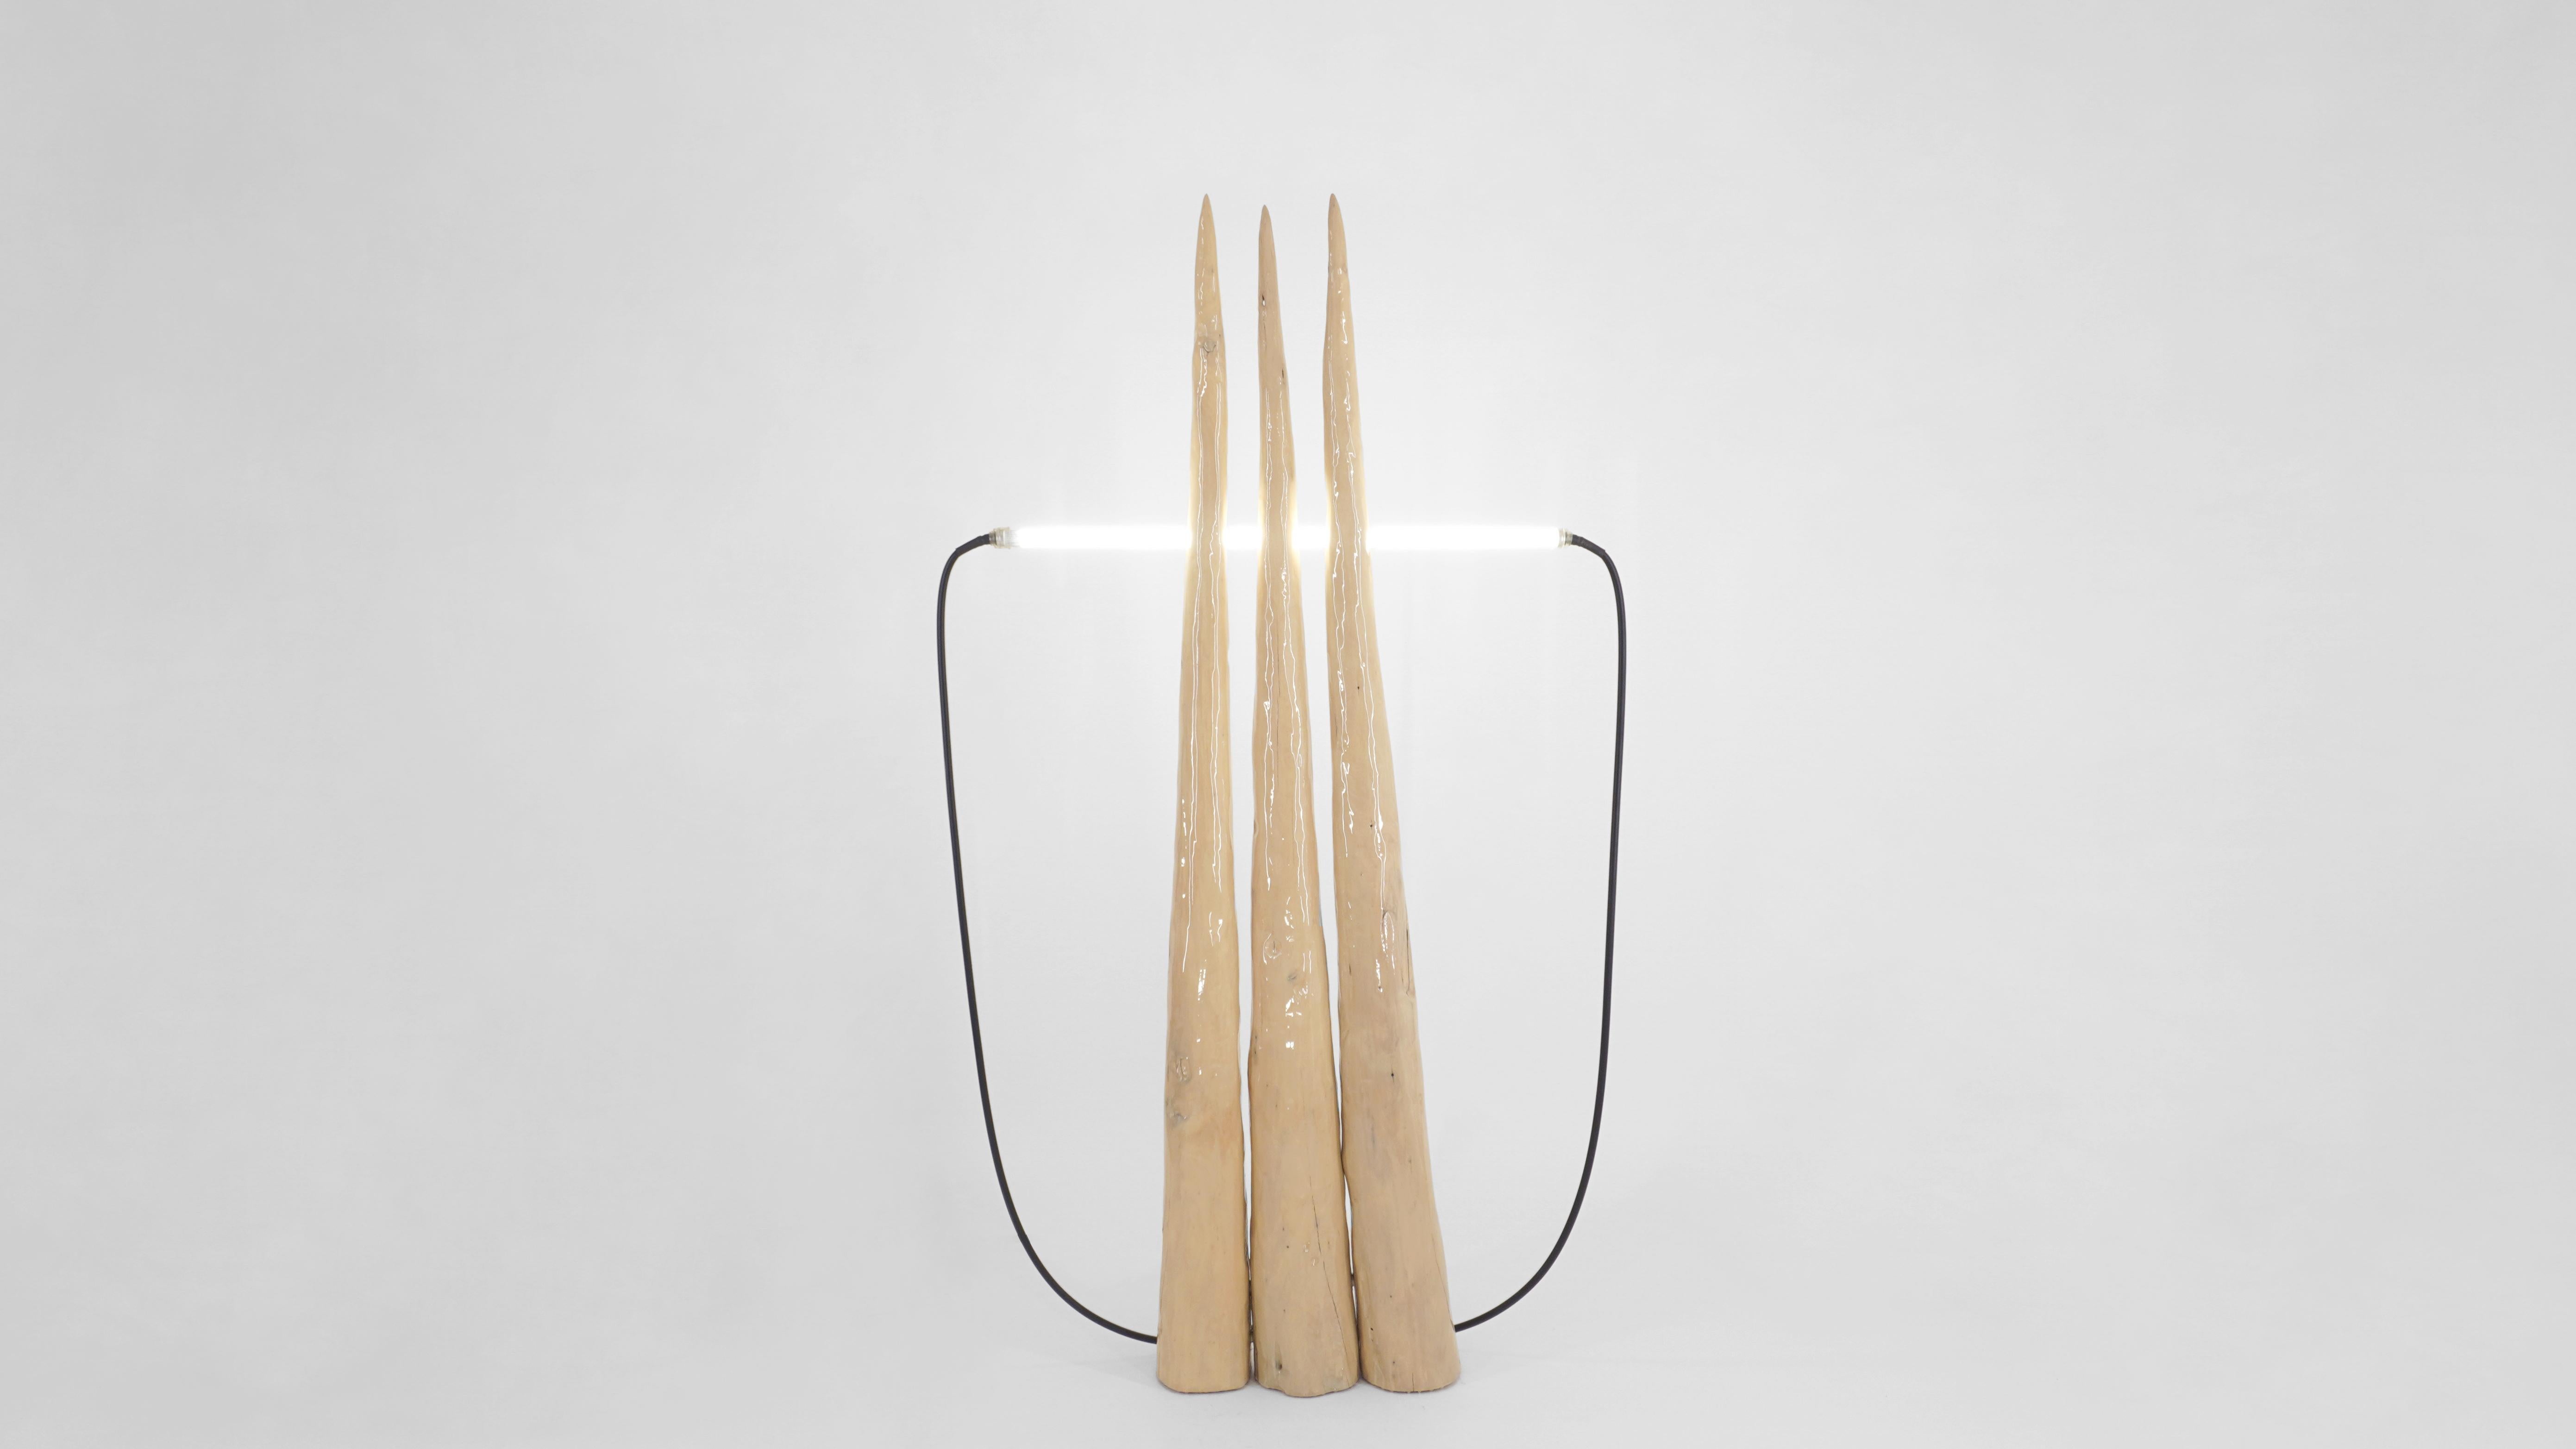 Three Spike Table Lamp by Henry D'ath
Dimensions: D 110 x W 20 x H 190 cm
Materials: Wood.
Available finishes: natural, black ink, translucent gloss. 


Henry d’ath is a New Zealand-born, Hong Kong-based artist and architect. 
Using predominantly